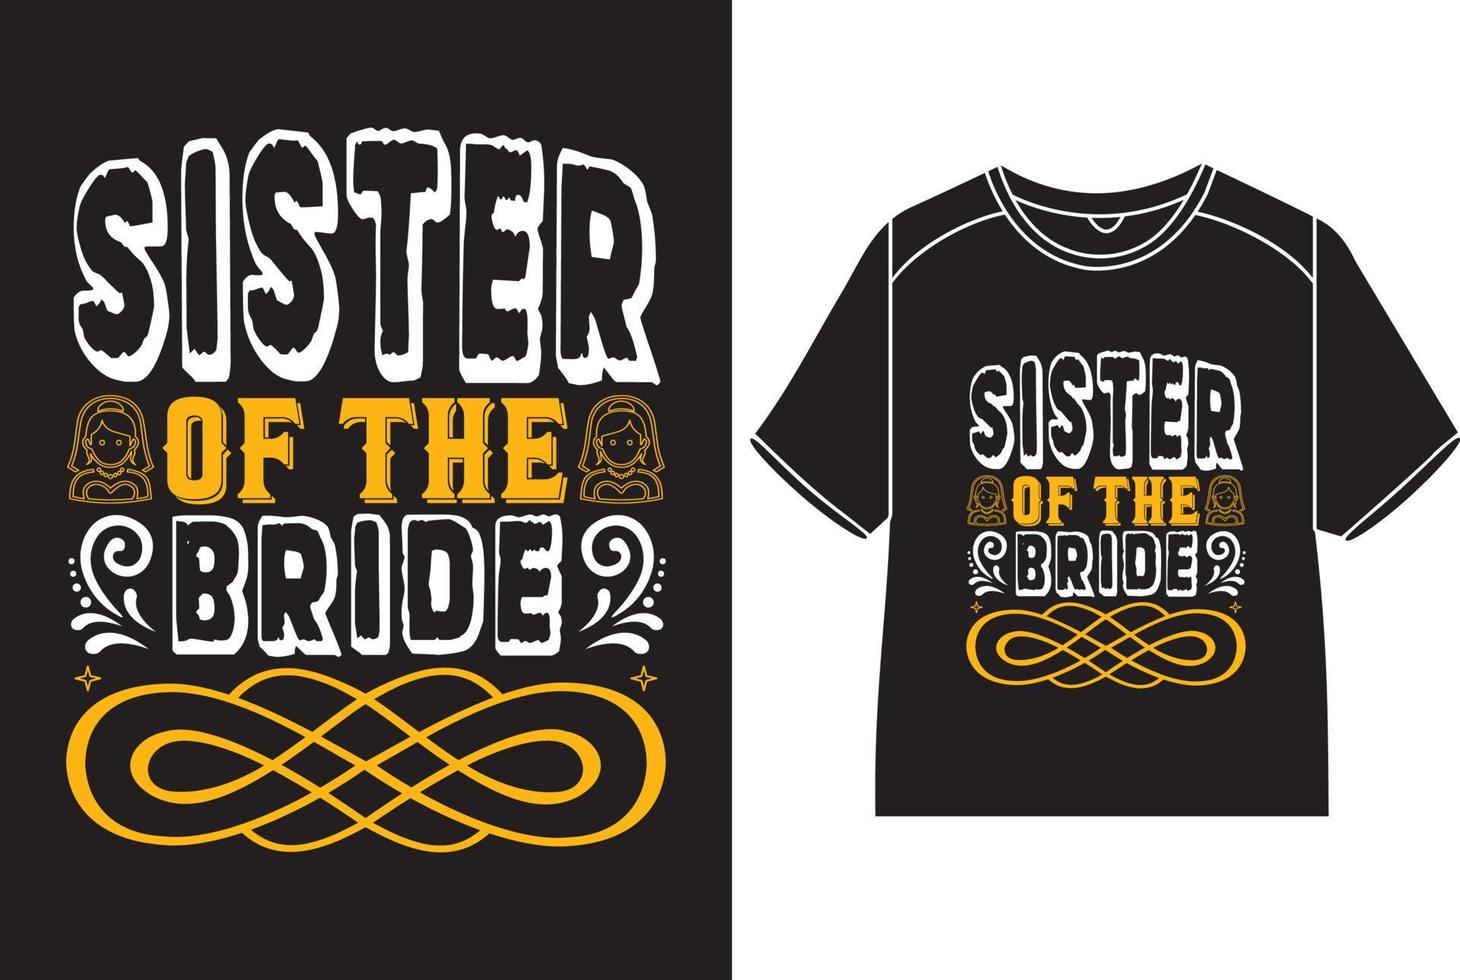 Sister of the bride SVG vector